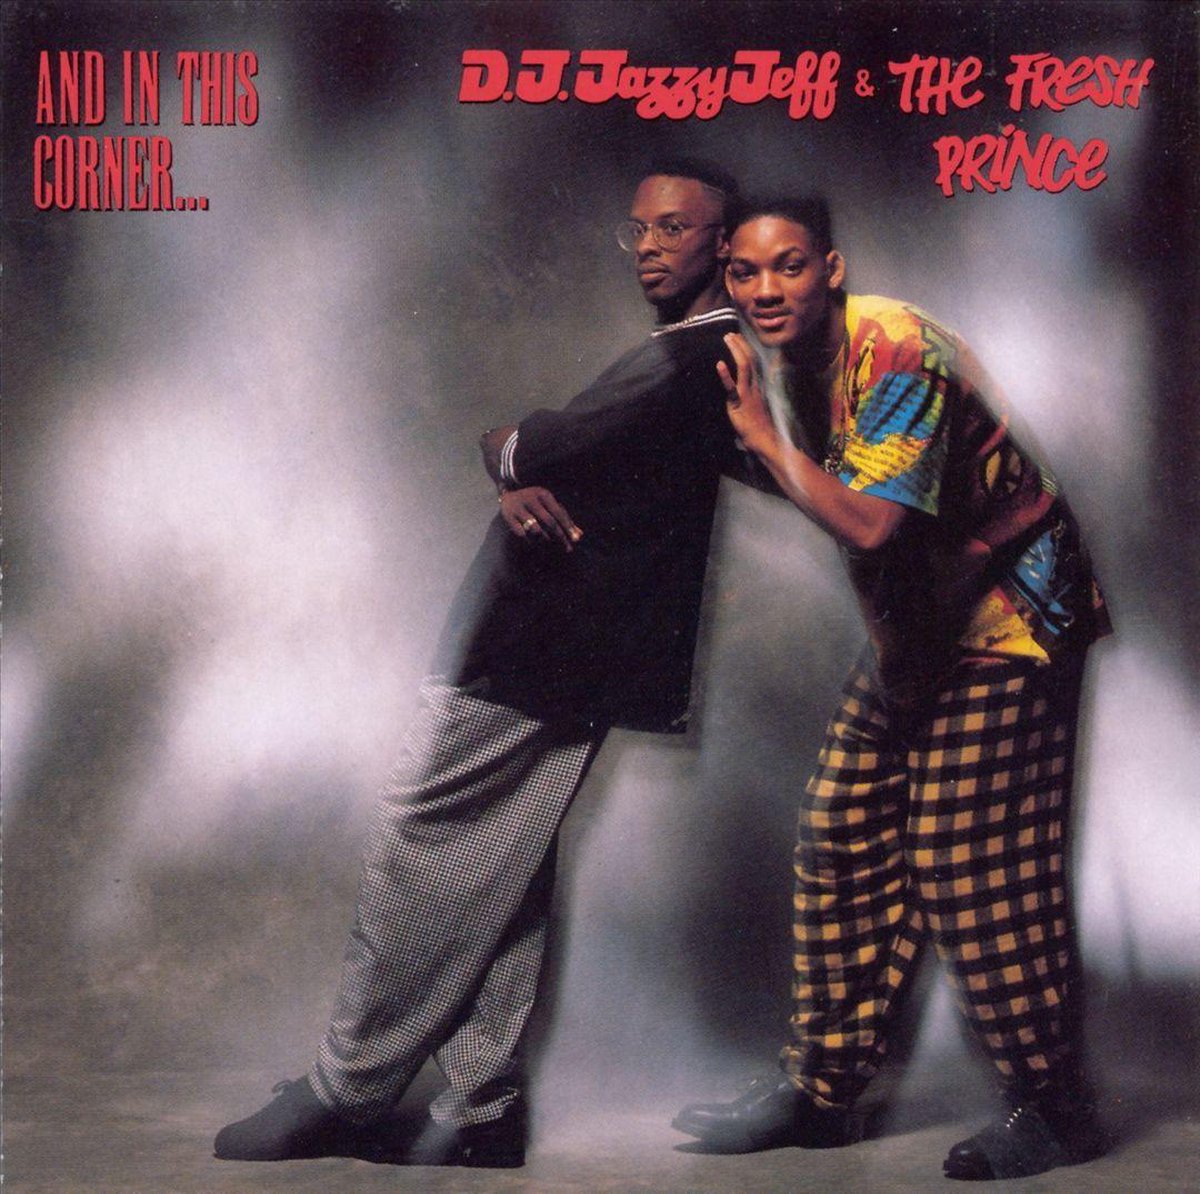 And In This Corner - DJ Jazzy Jeff & The Fresh Prince